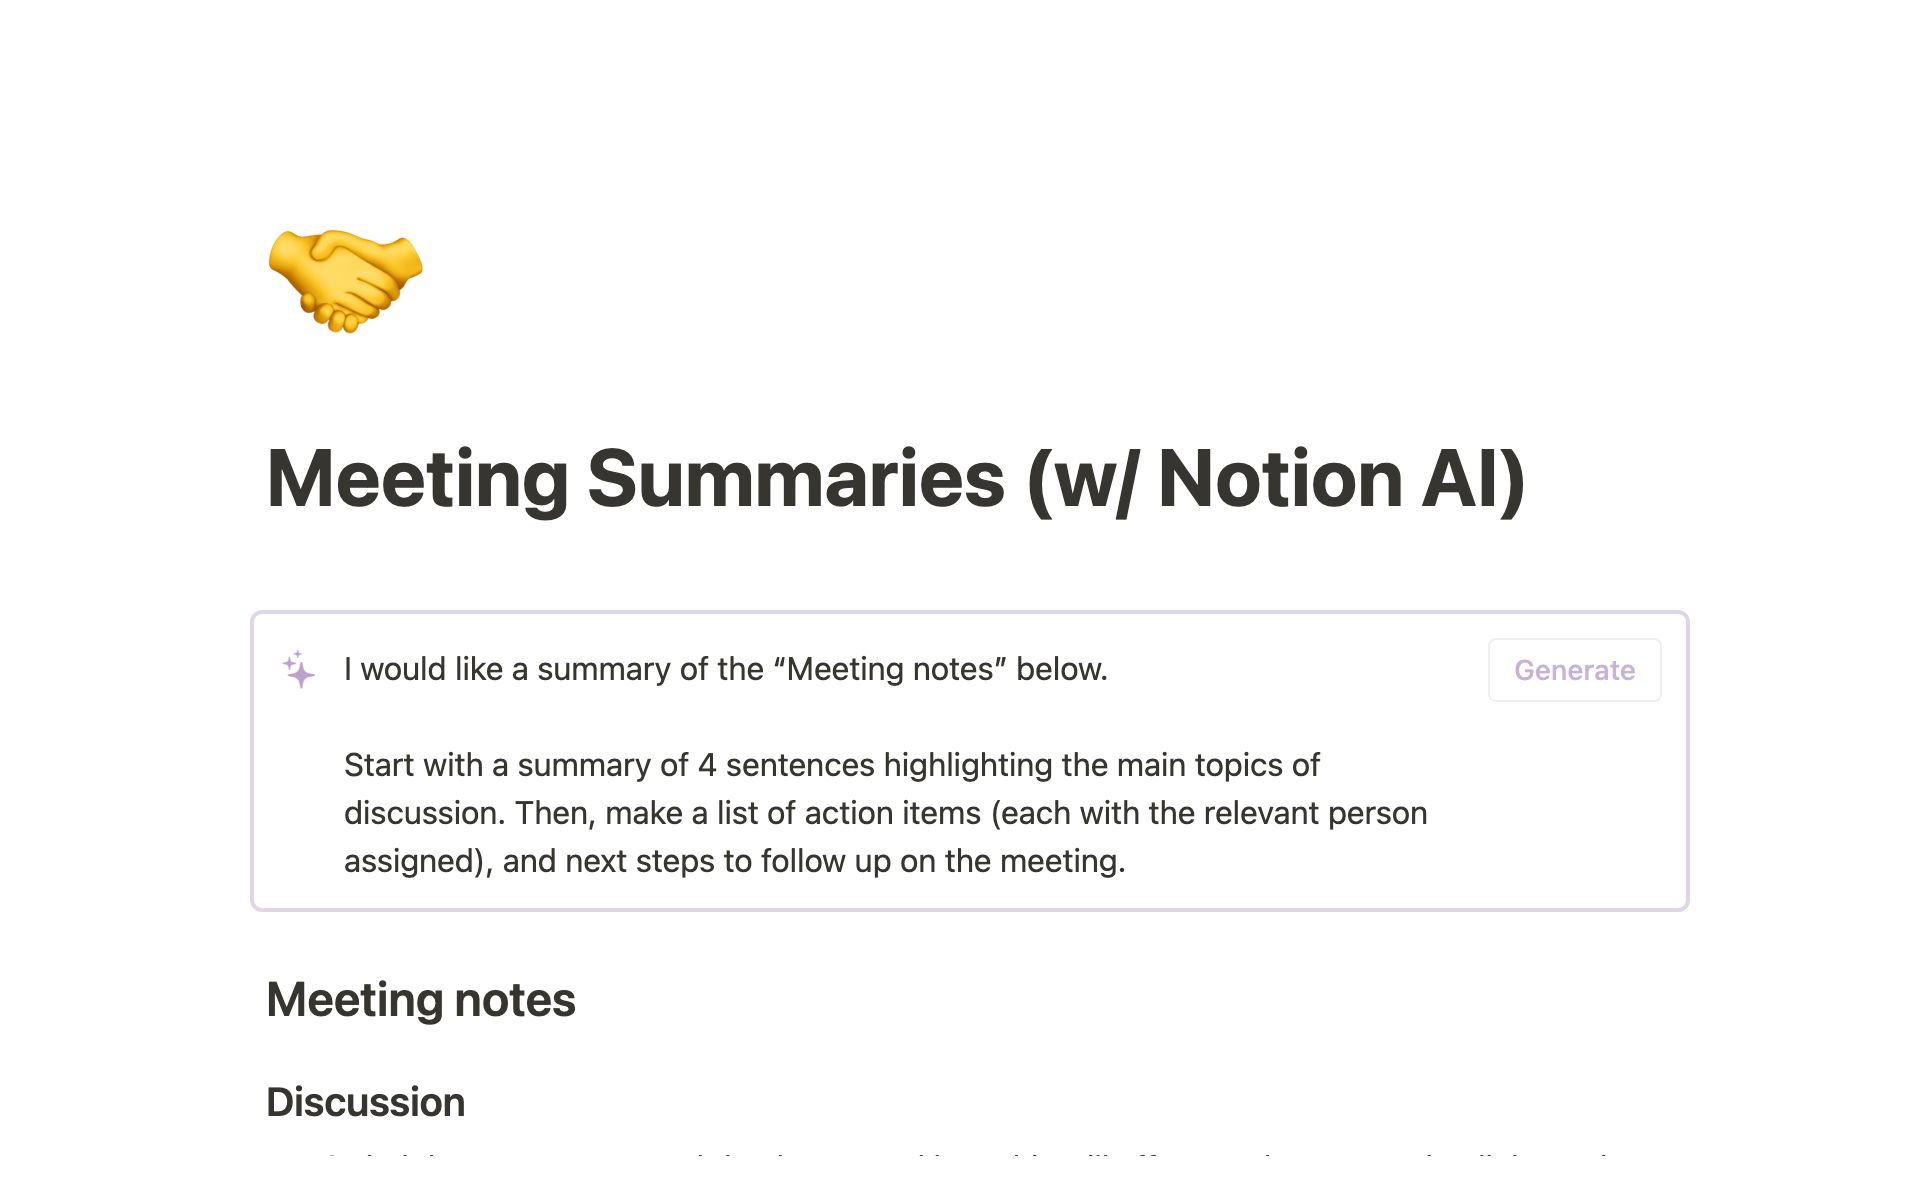 Centralize meeting notes and action items so everyone’s informed and prepared